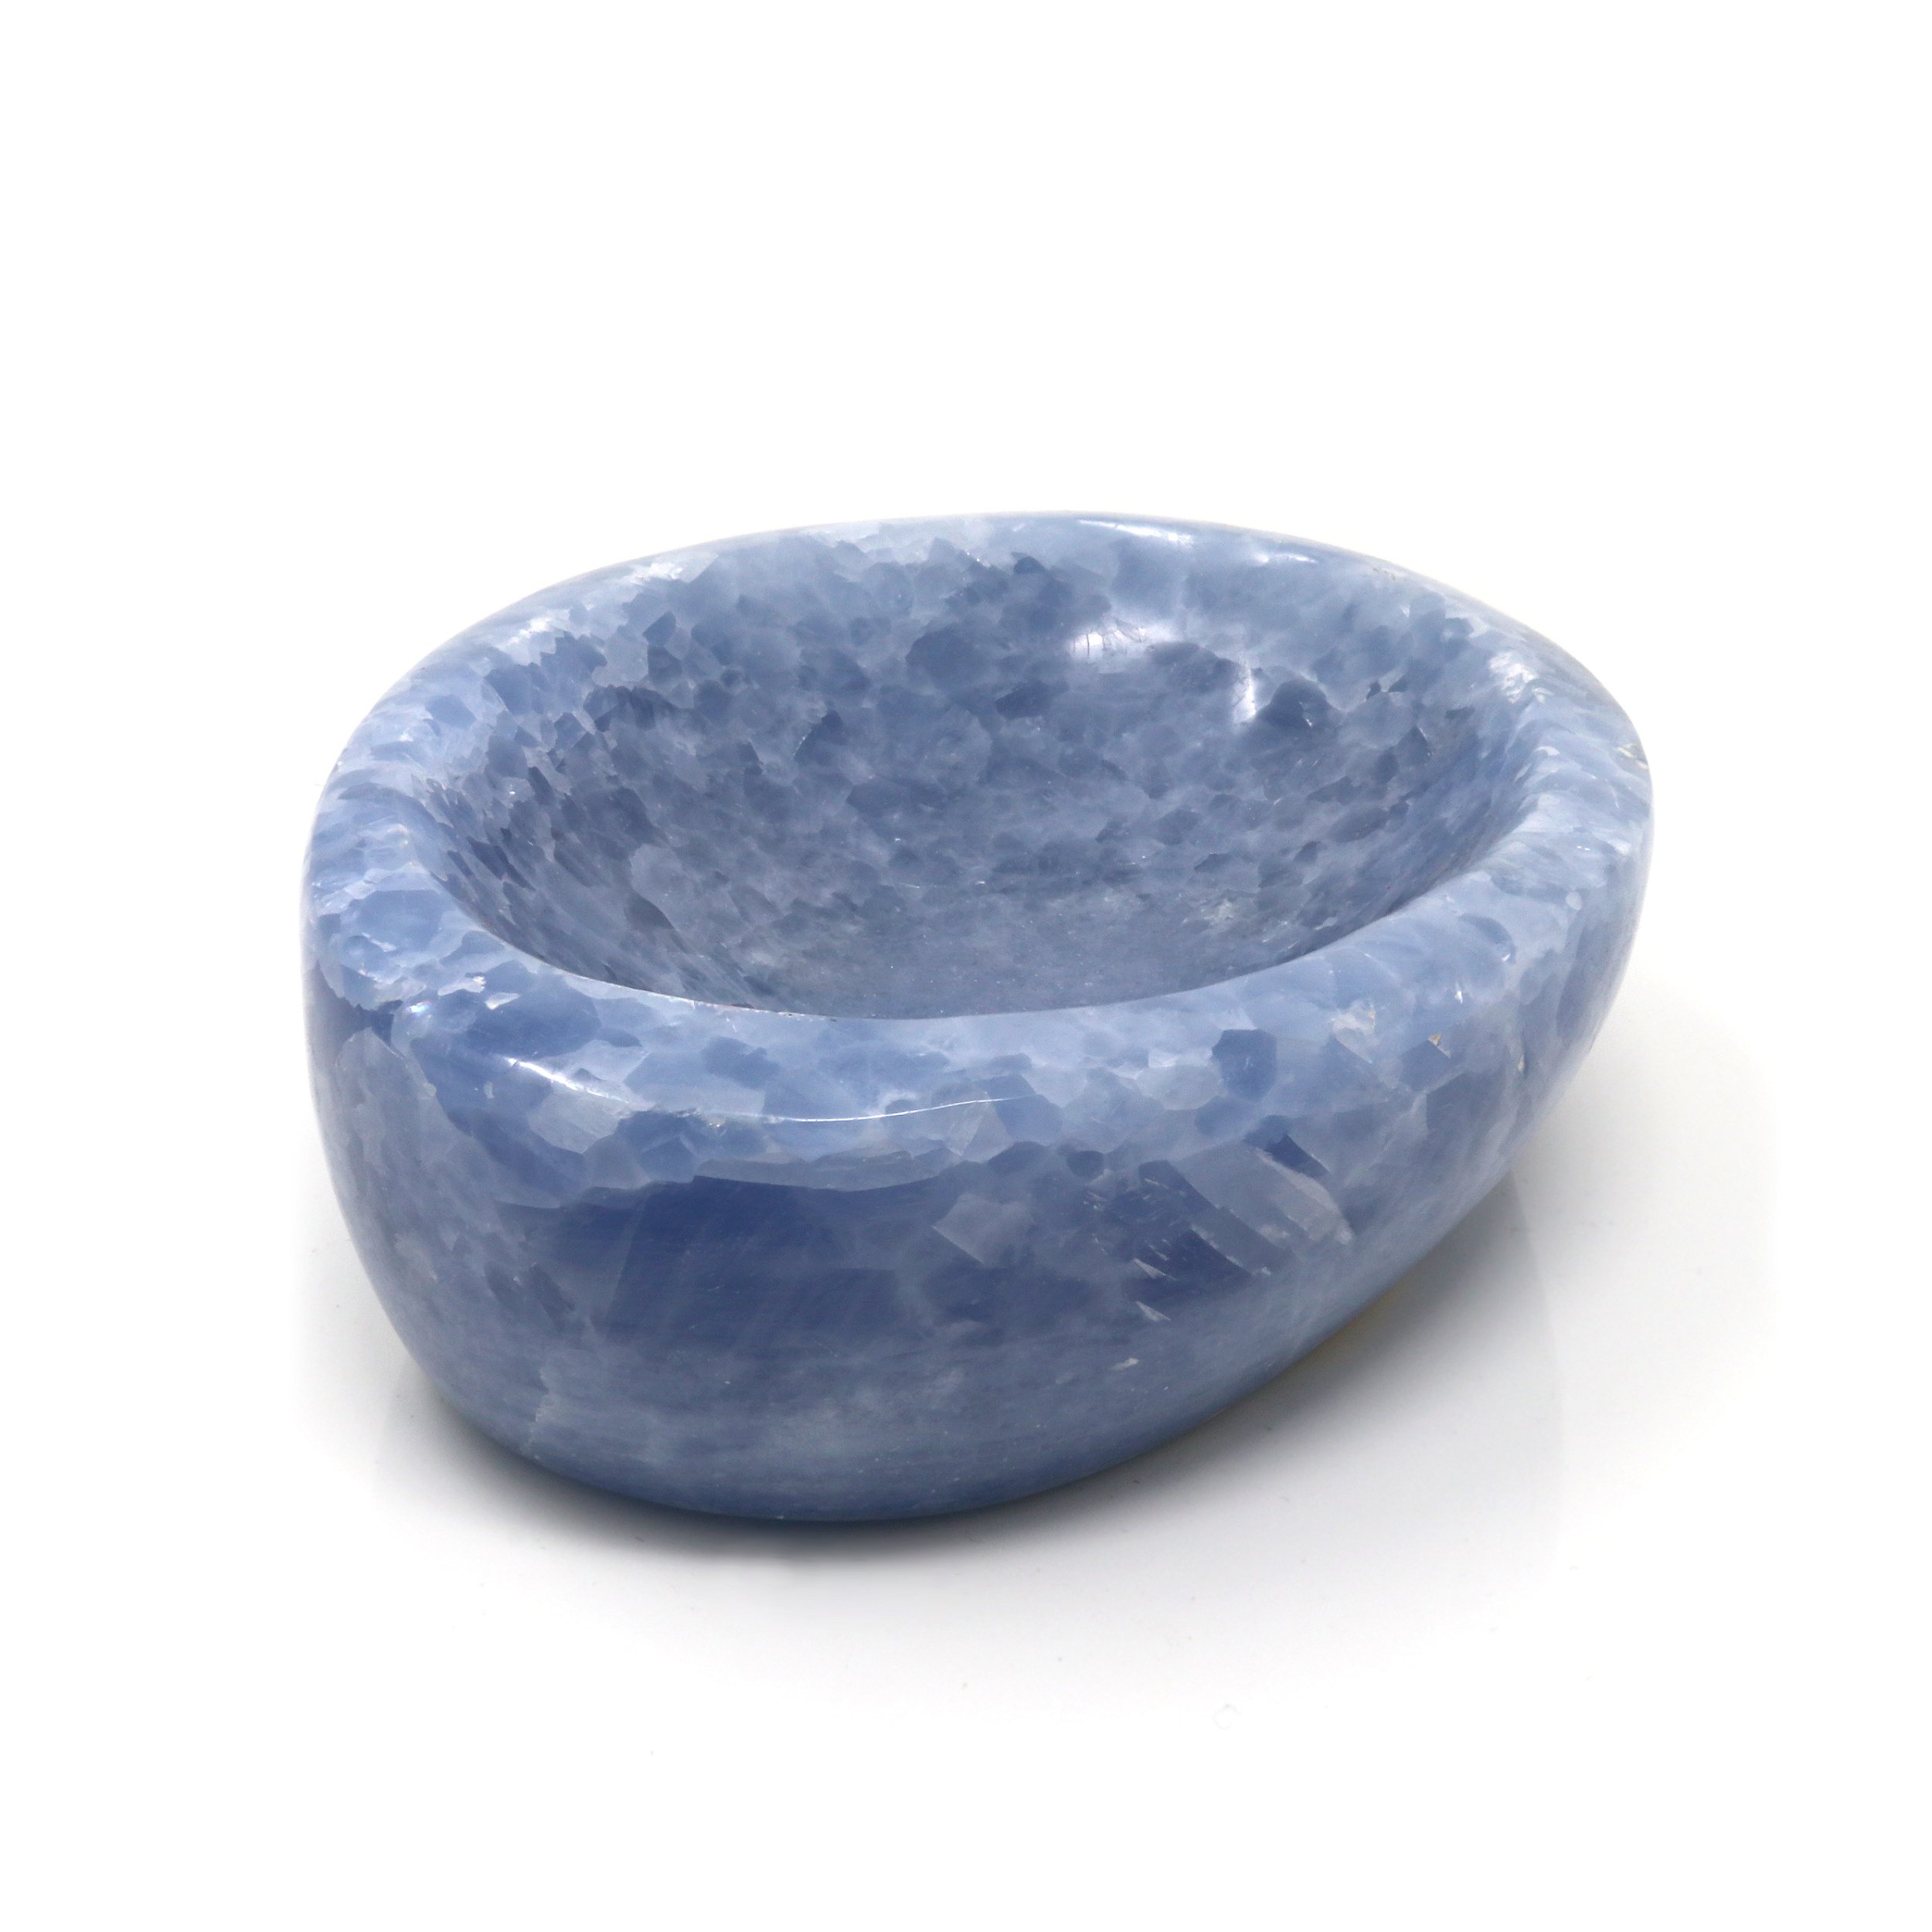 Blue Calcite Dish - Smooth Crystals In The Bottom Of The Dish With Dense Crystals Around The Top